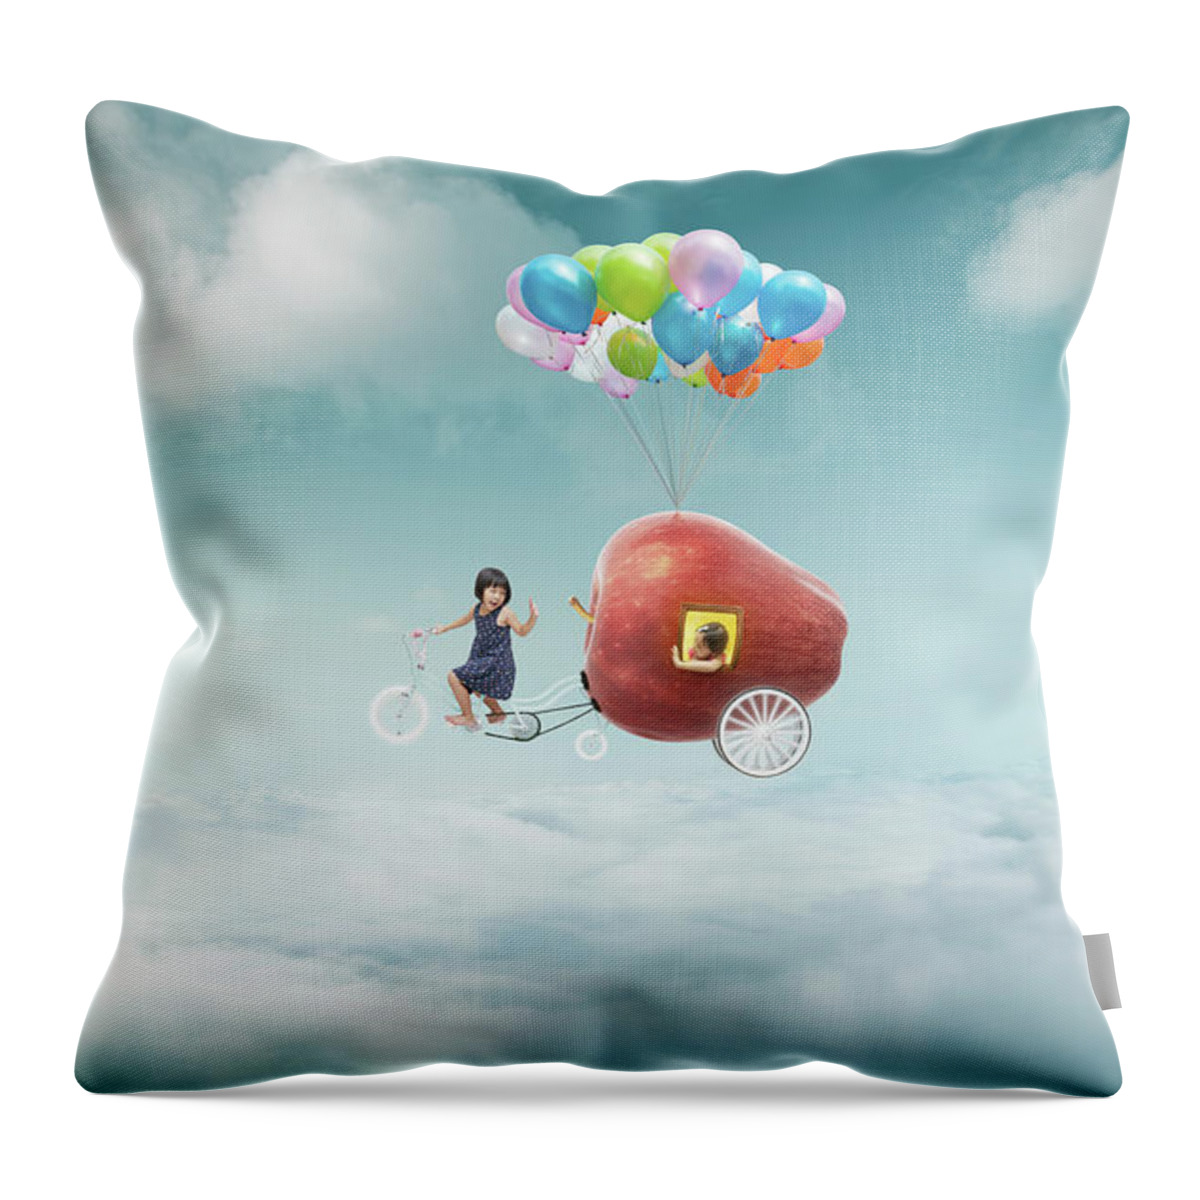 Child Throw Pillow featuring the photograph Happy Sister Enjoy With Fantasy Apple by Jamesteohart